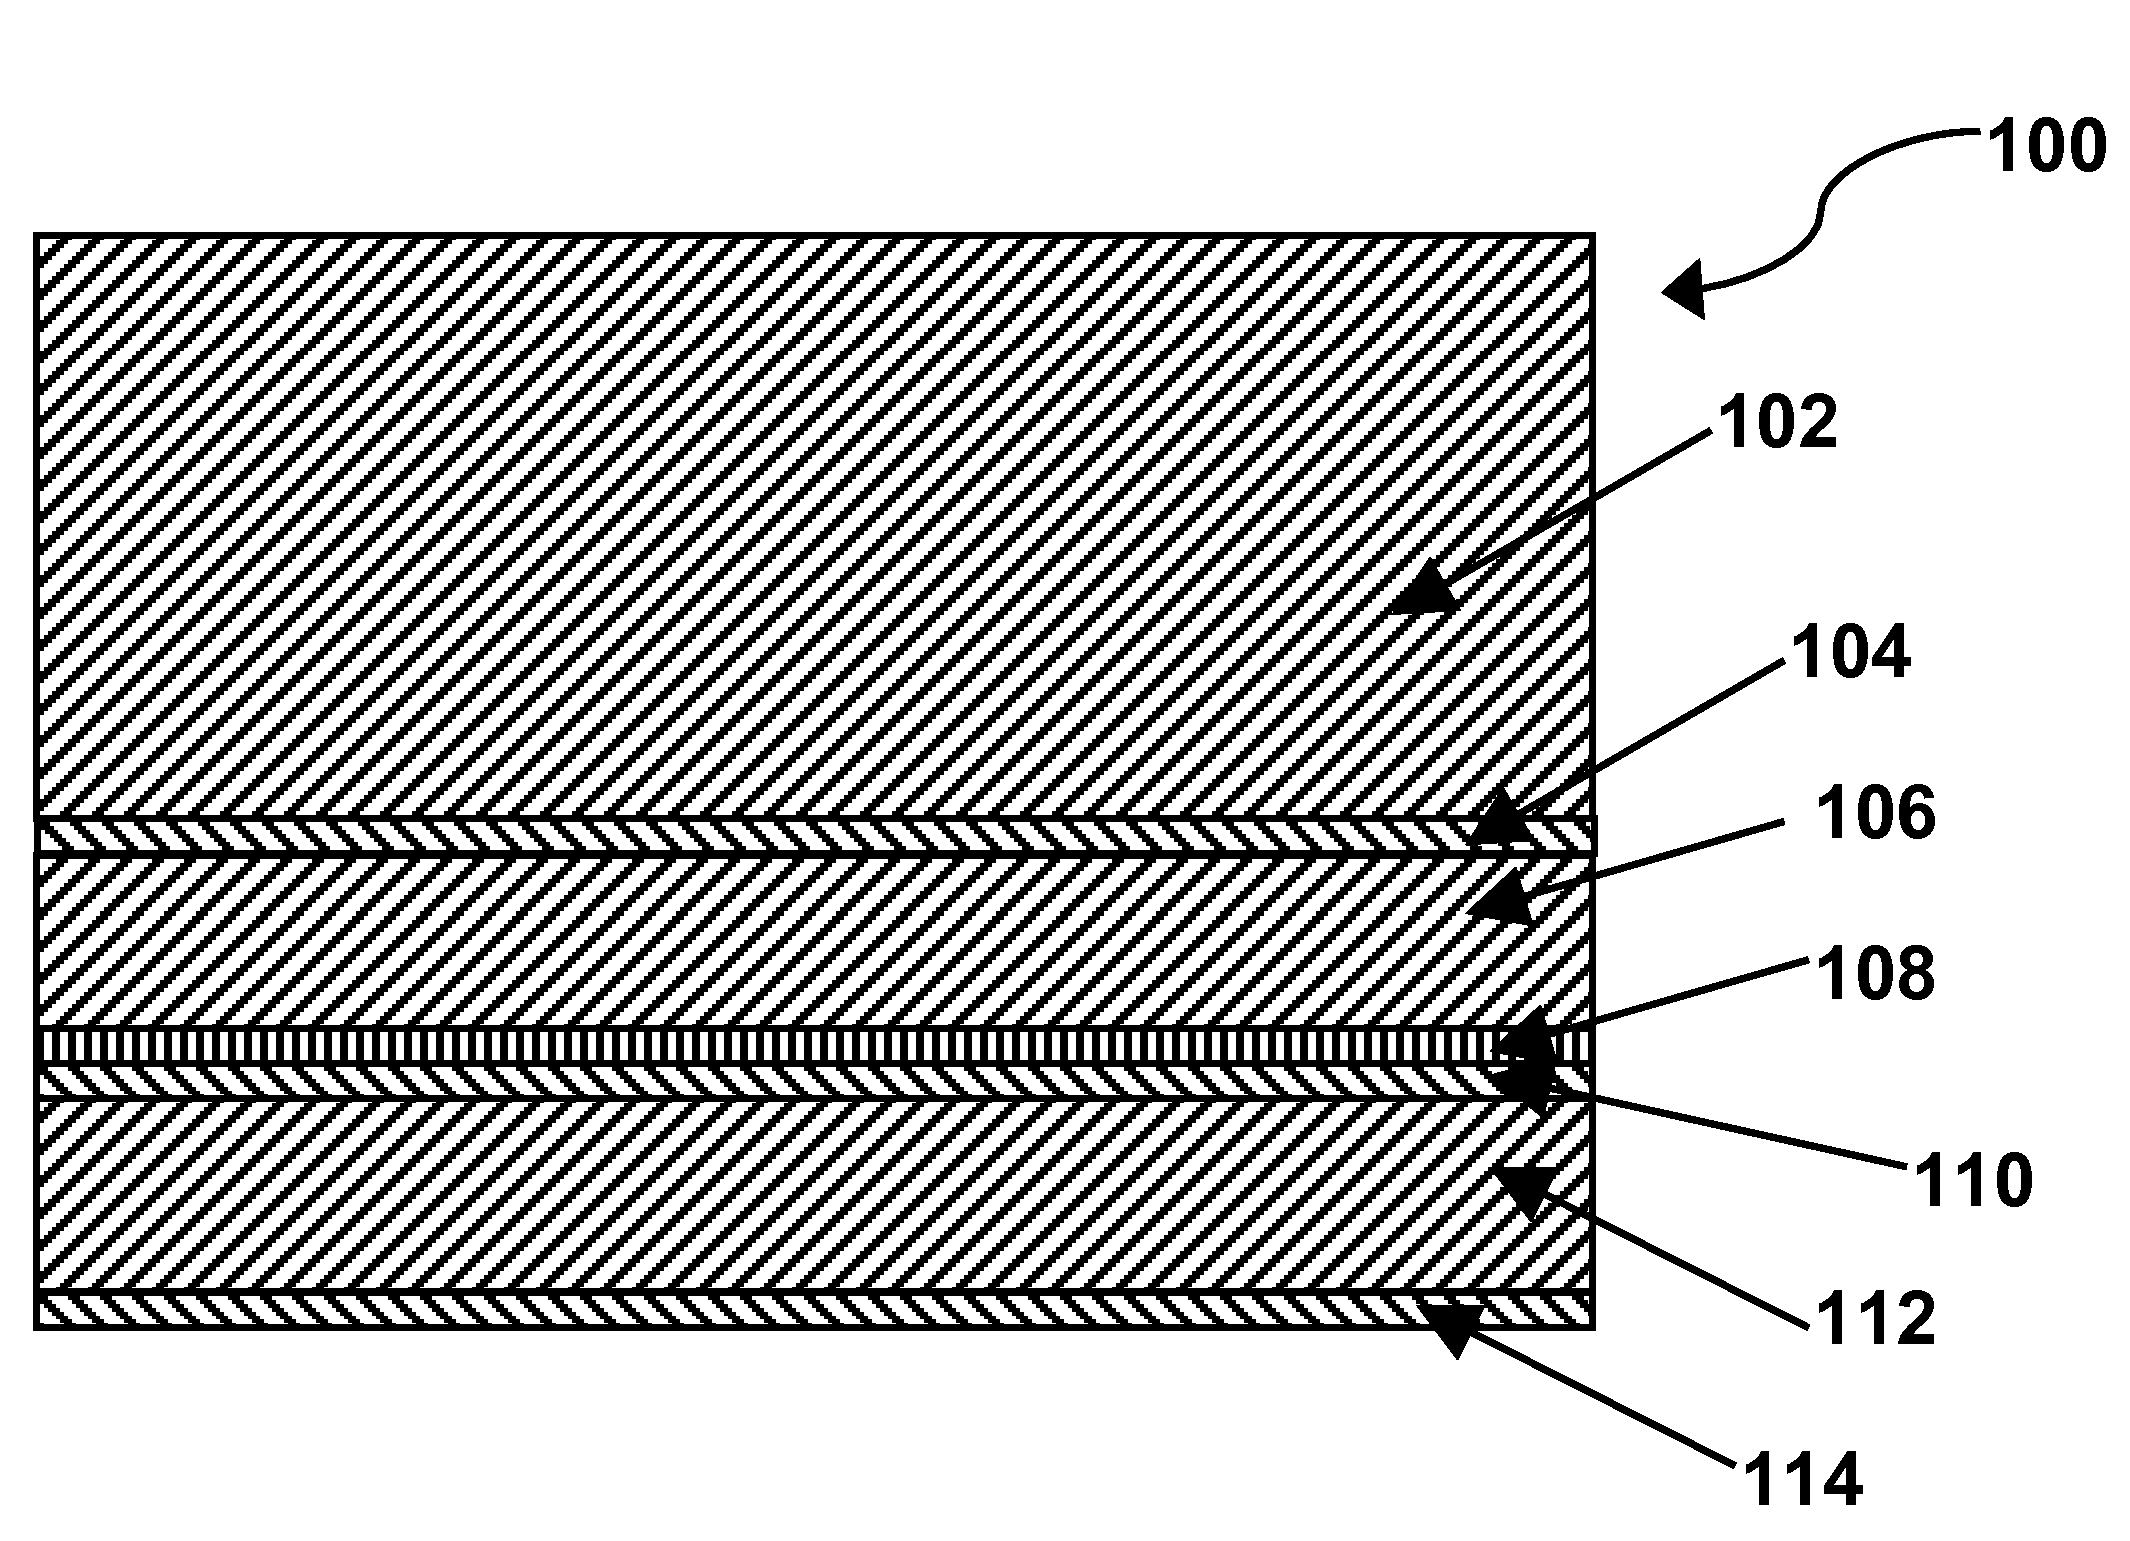 Multi-layer sheet for use in electro-optic displays